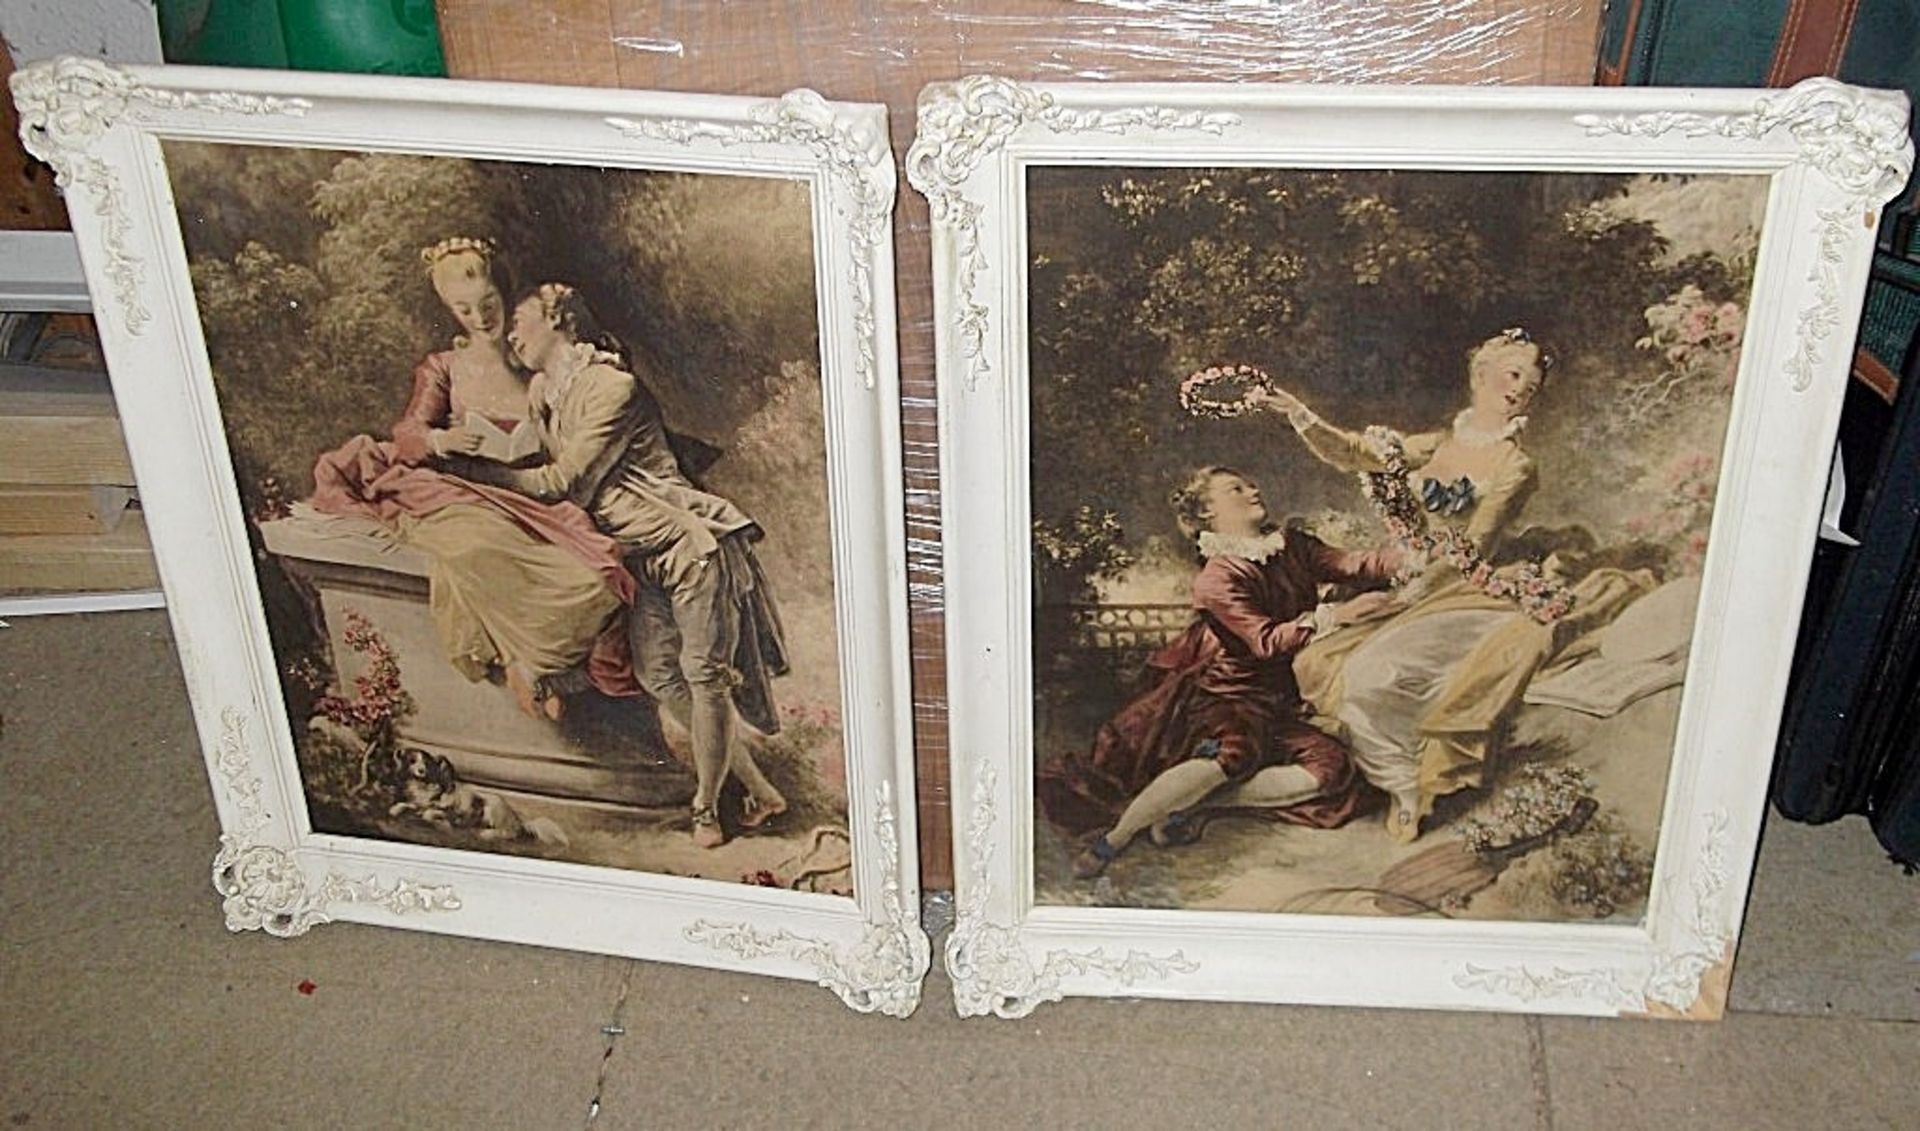 A Pair Of Framed Baroque Art Prints By B&S Creations, New York - Both Very Rare & Charming